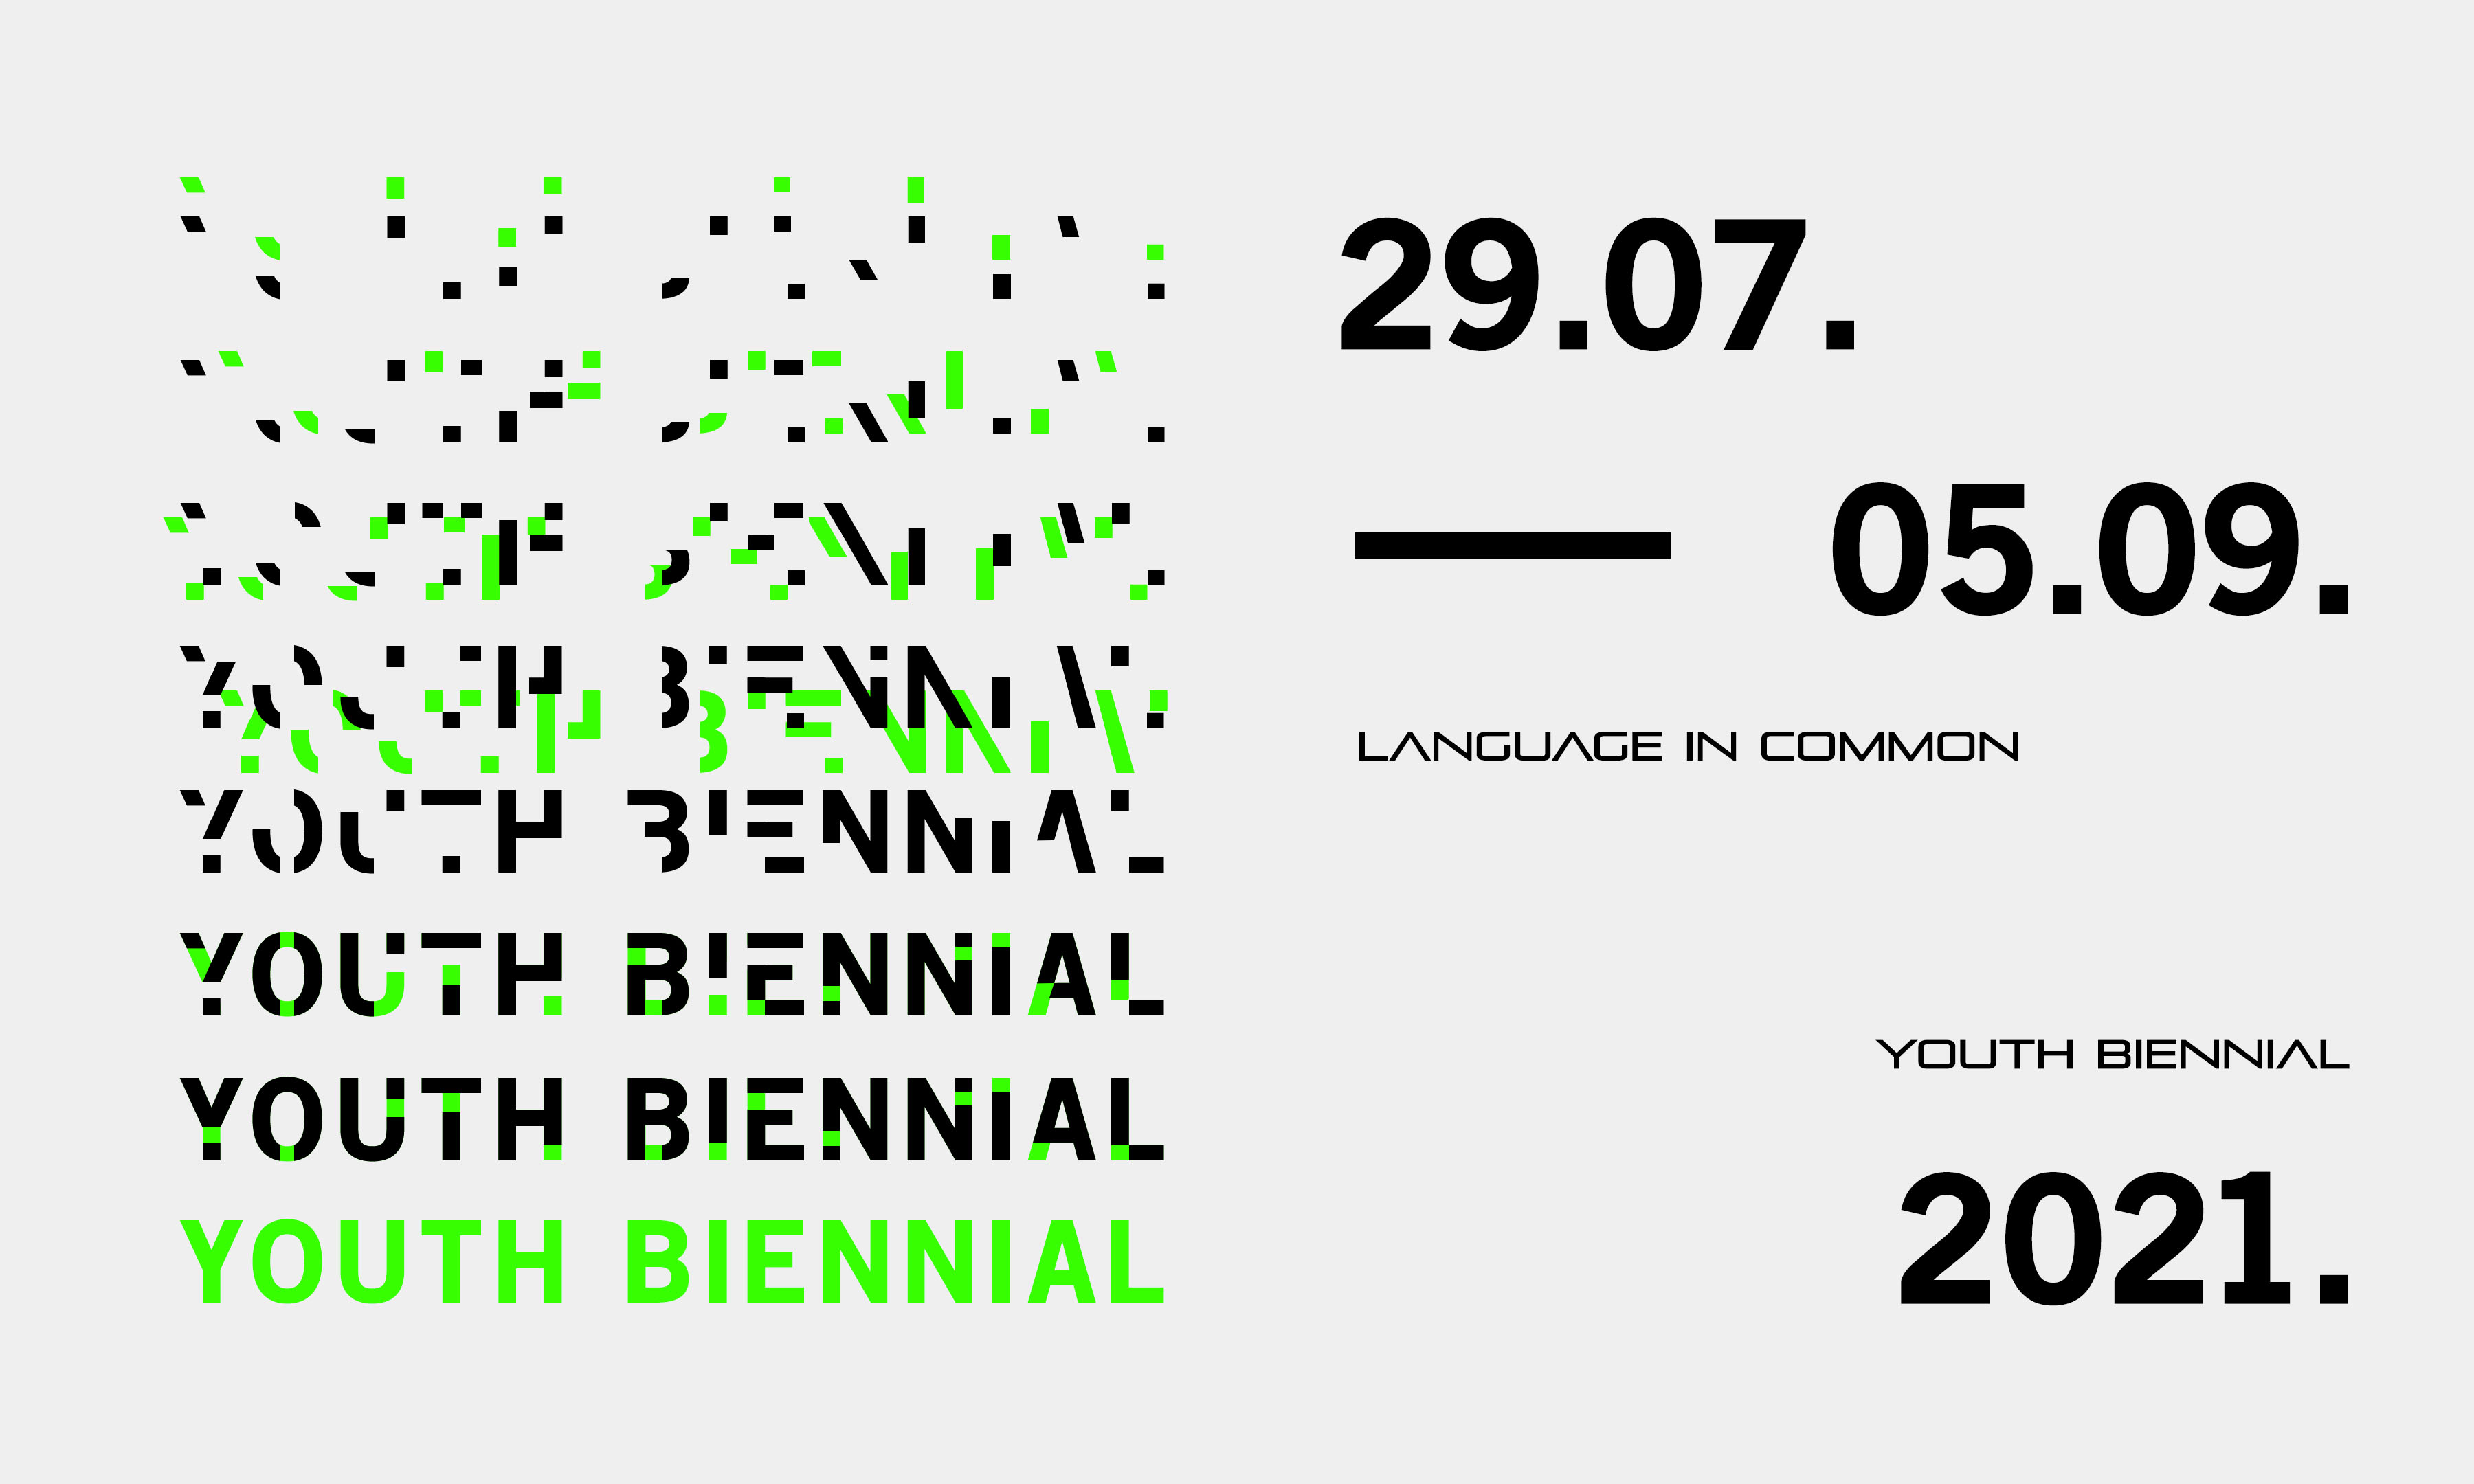 Language in Common - Youth Biennial 2021